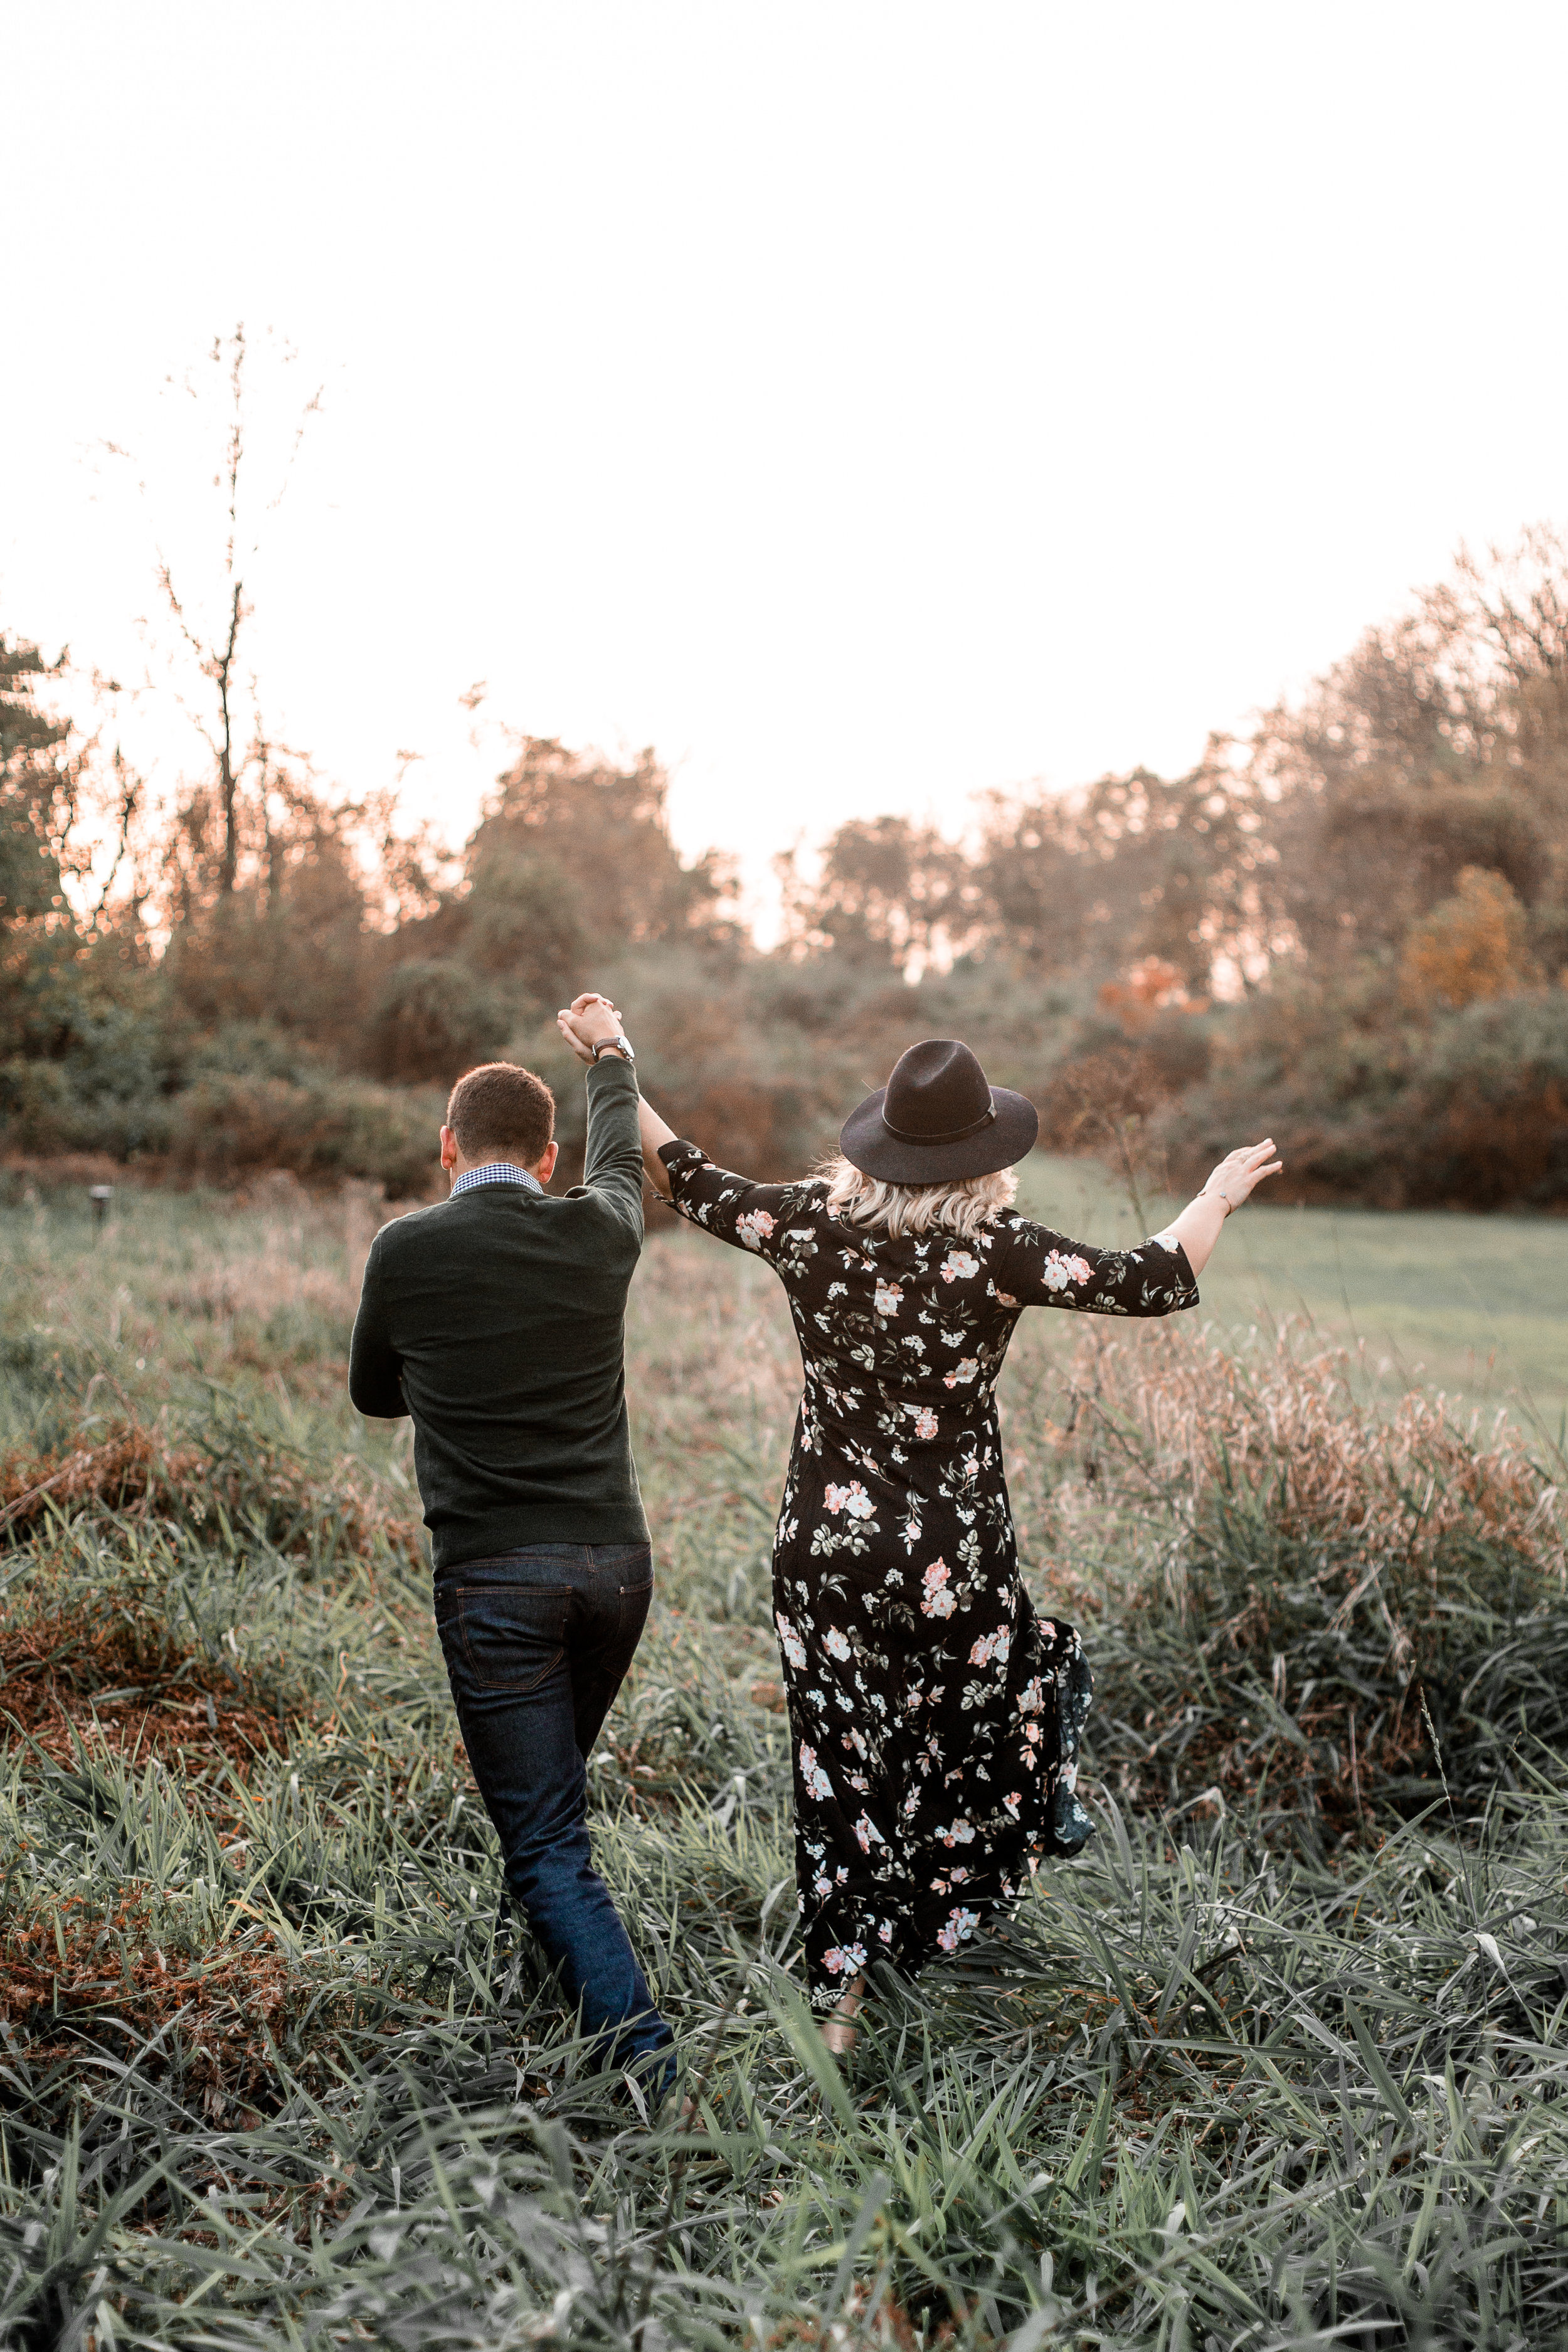 nicole-daacke-photography-carefree-bohemian-lancaster-pa-pennsylvania-engagement-photos-engagement-session-golden-sunset-adventure-session-in-lancaster-pa-lancaster-pa-outdoor-wedding-photographer-33.jpg